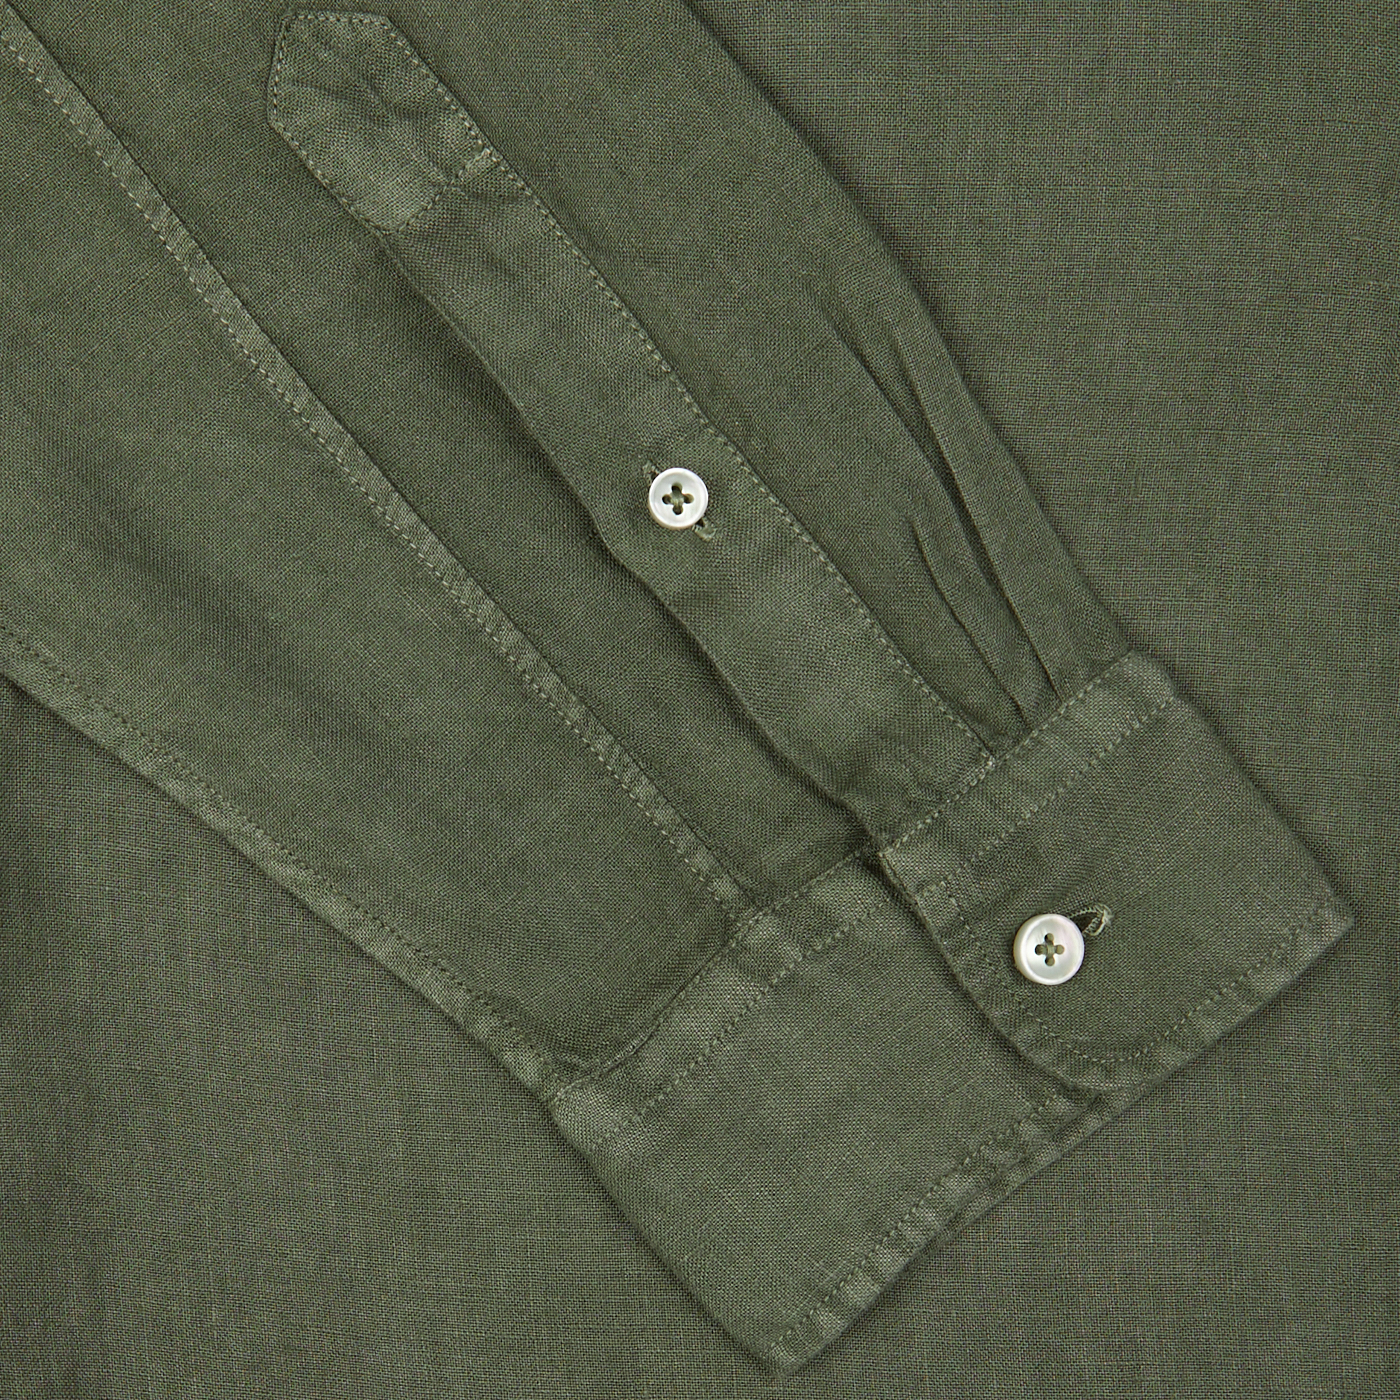 Close-up of an Olive Green Washed Linen Legacy Shirt sleeve with buttons by Xacus.